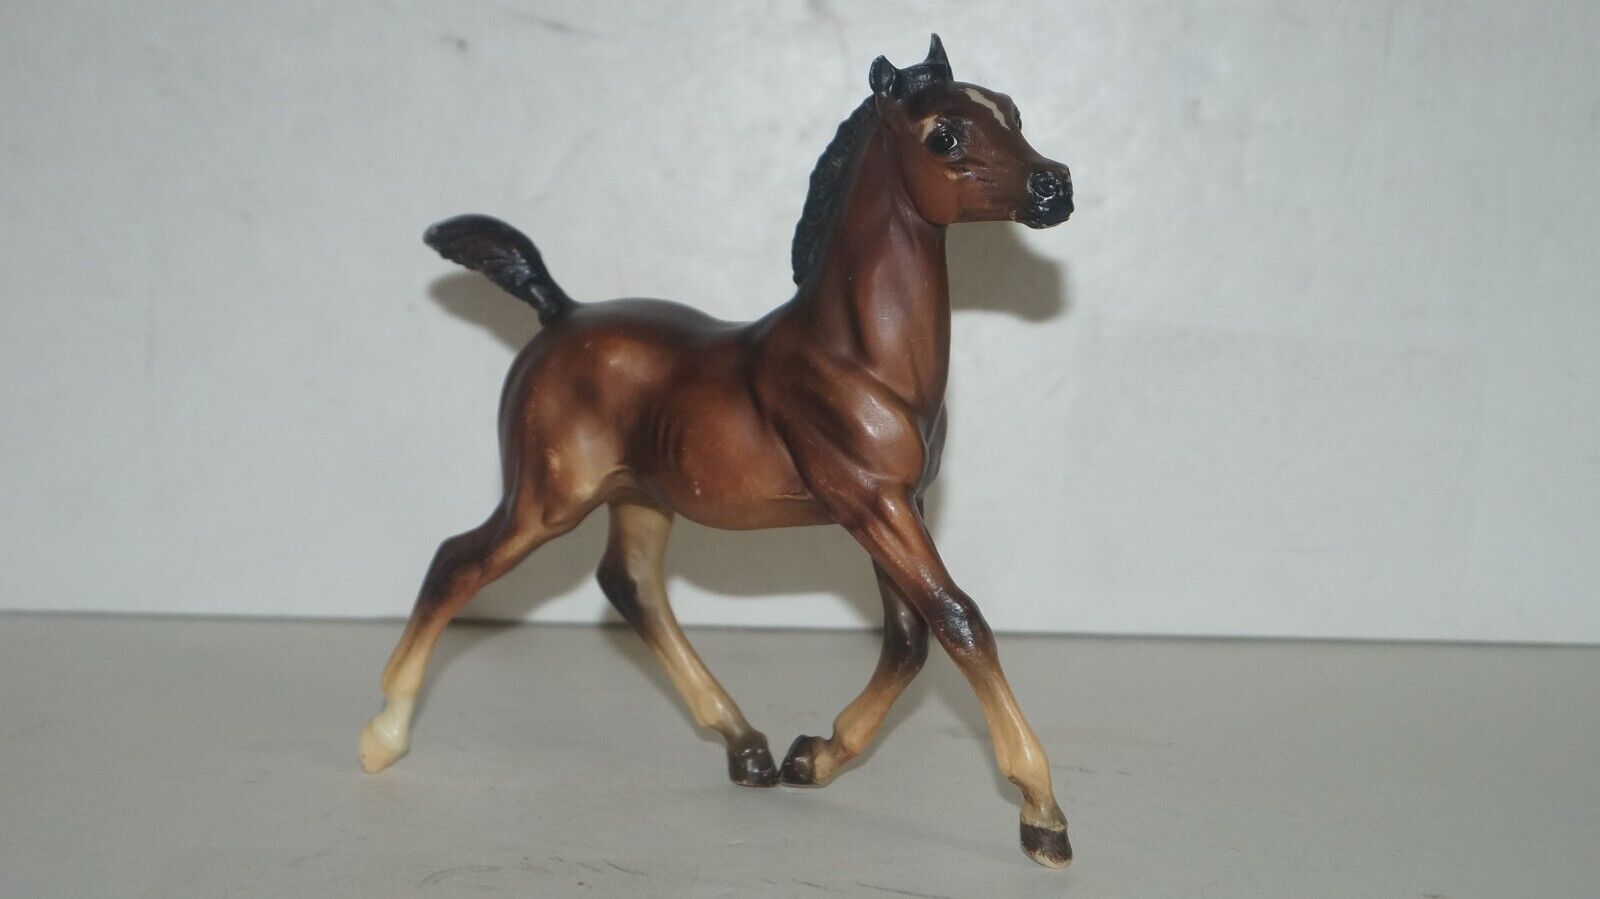 BREYER Horse Figurine by Reeves Int'l Inc